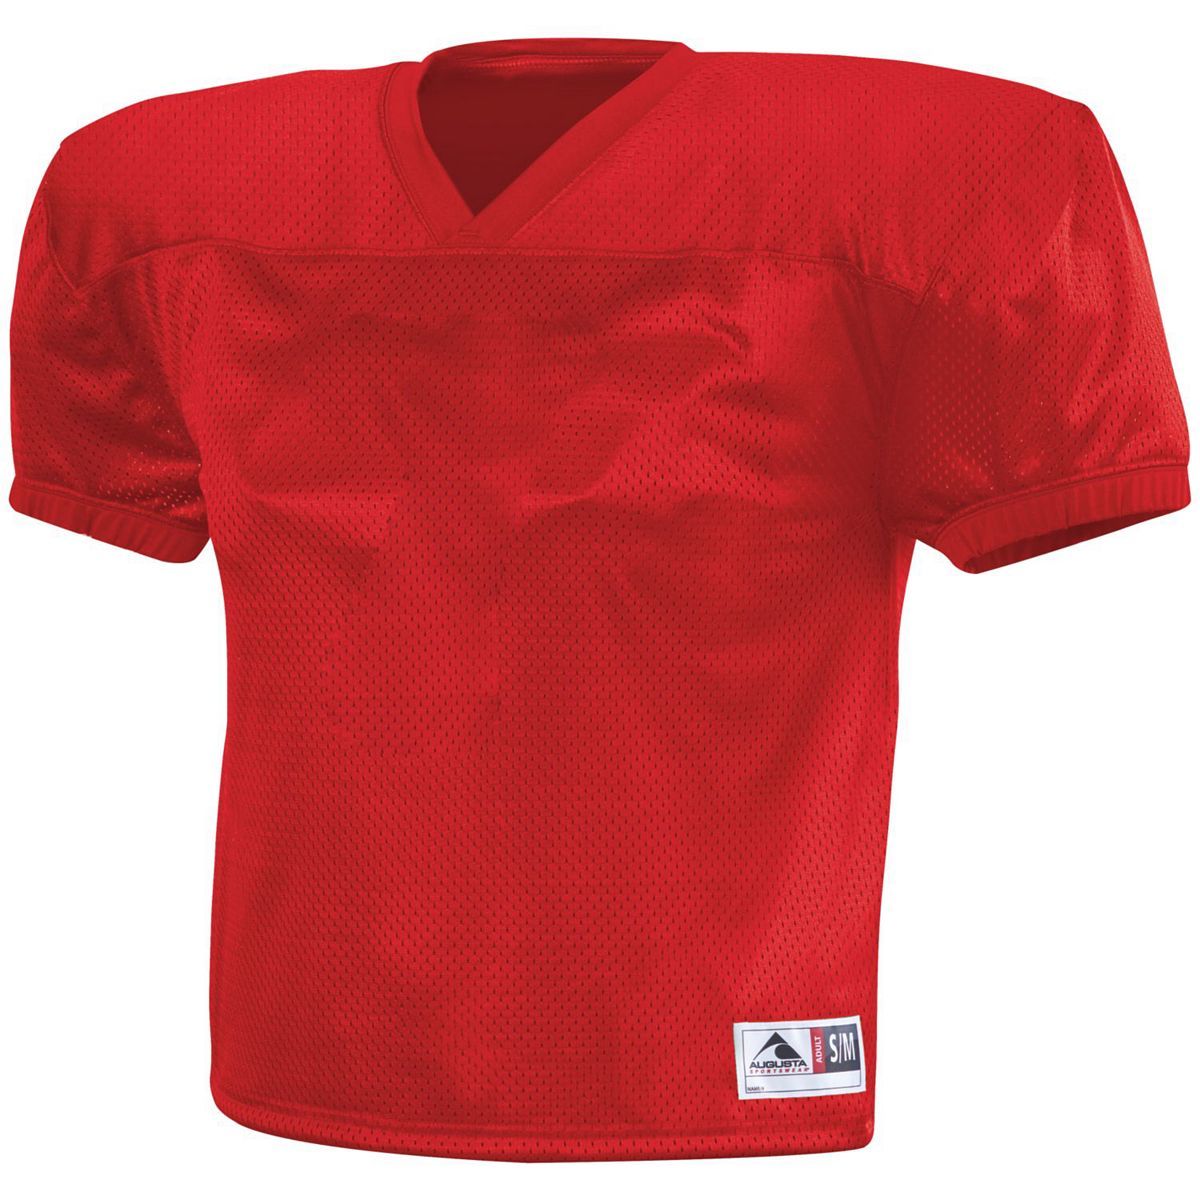 Augusta Sportswear Youth Dash Practice Jersey in Red  -Part of the Youth, Youth-Jersey, Augusta-Products, Football, Shirts, All-Sports, All-Sports-1 product lines at KanaleyCreations.com